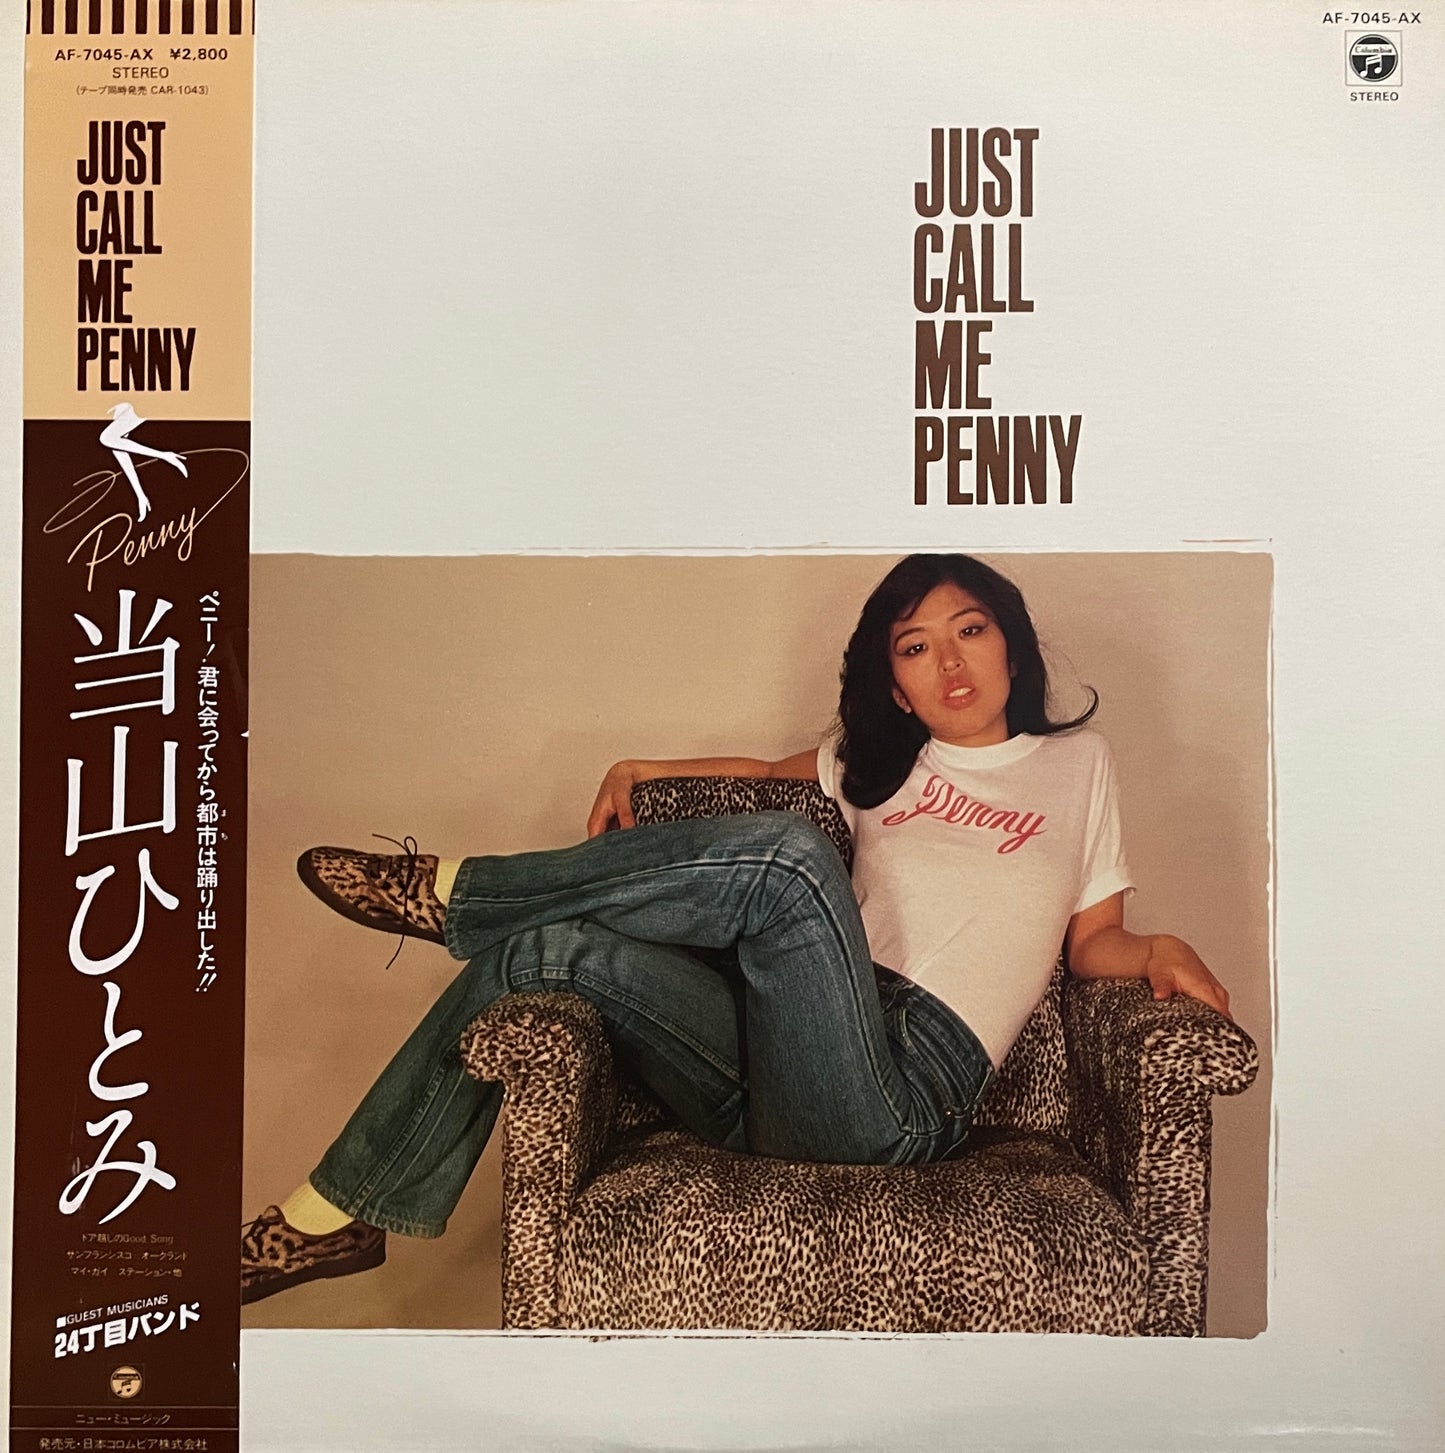 Hitomi Tohyama "Just Call Me Penny" (1981)